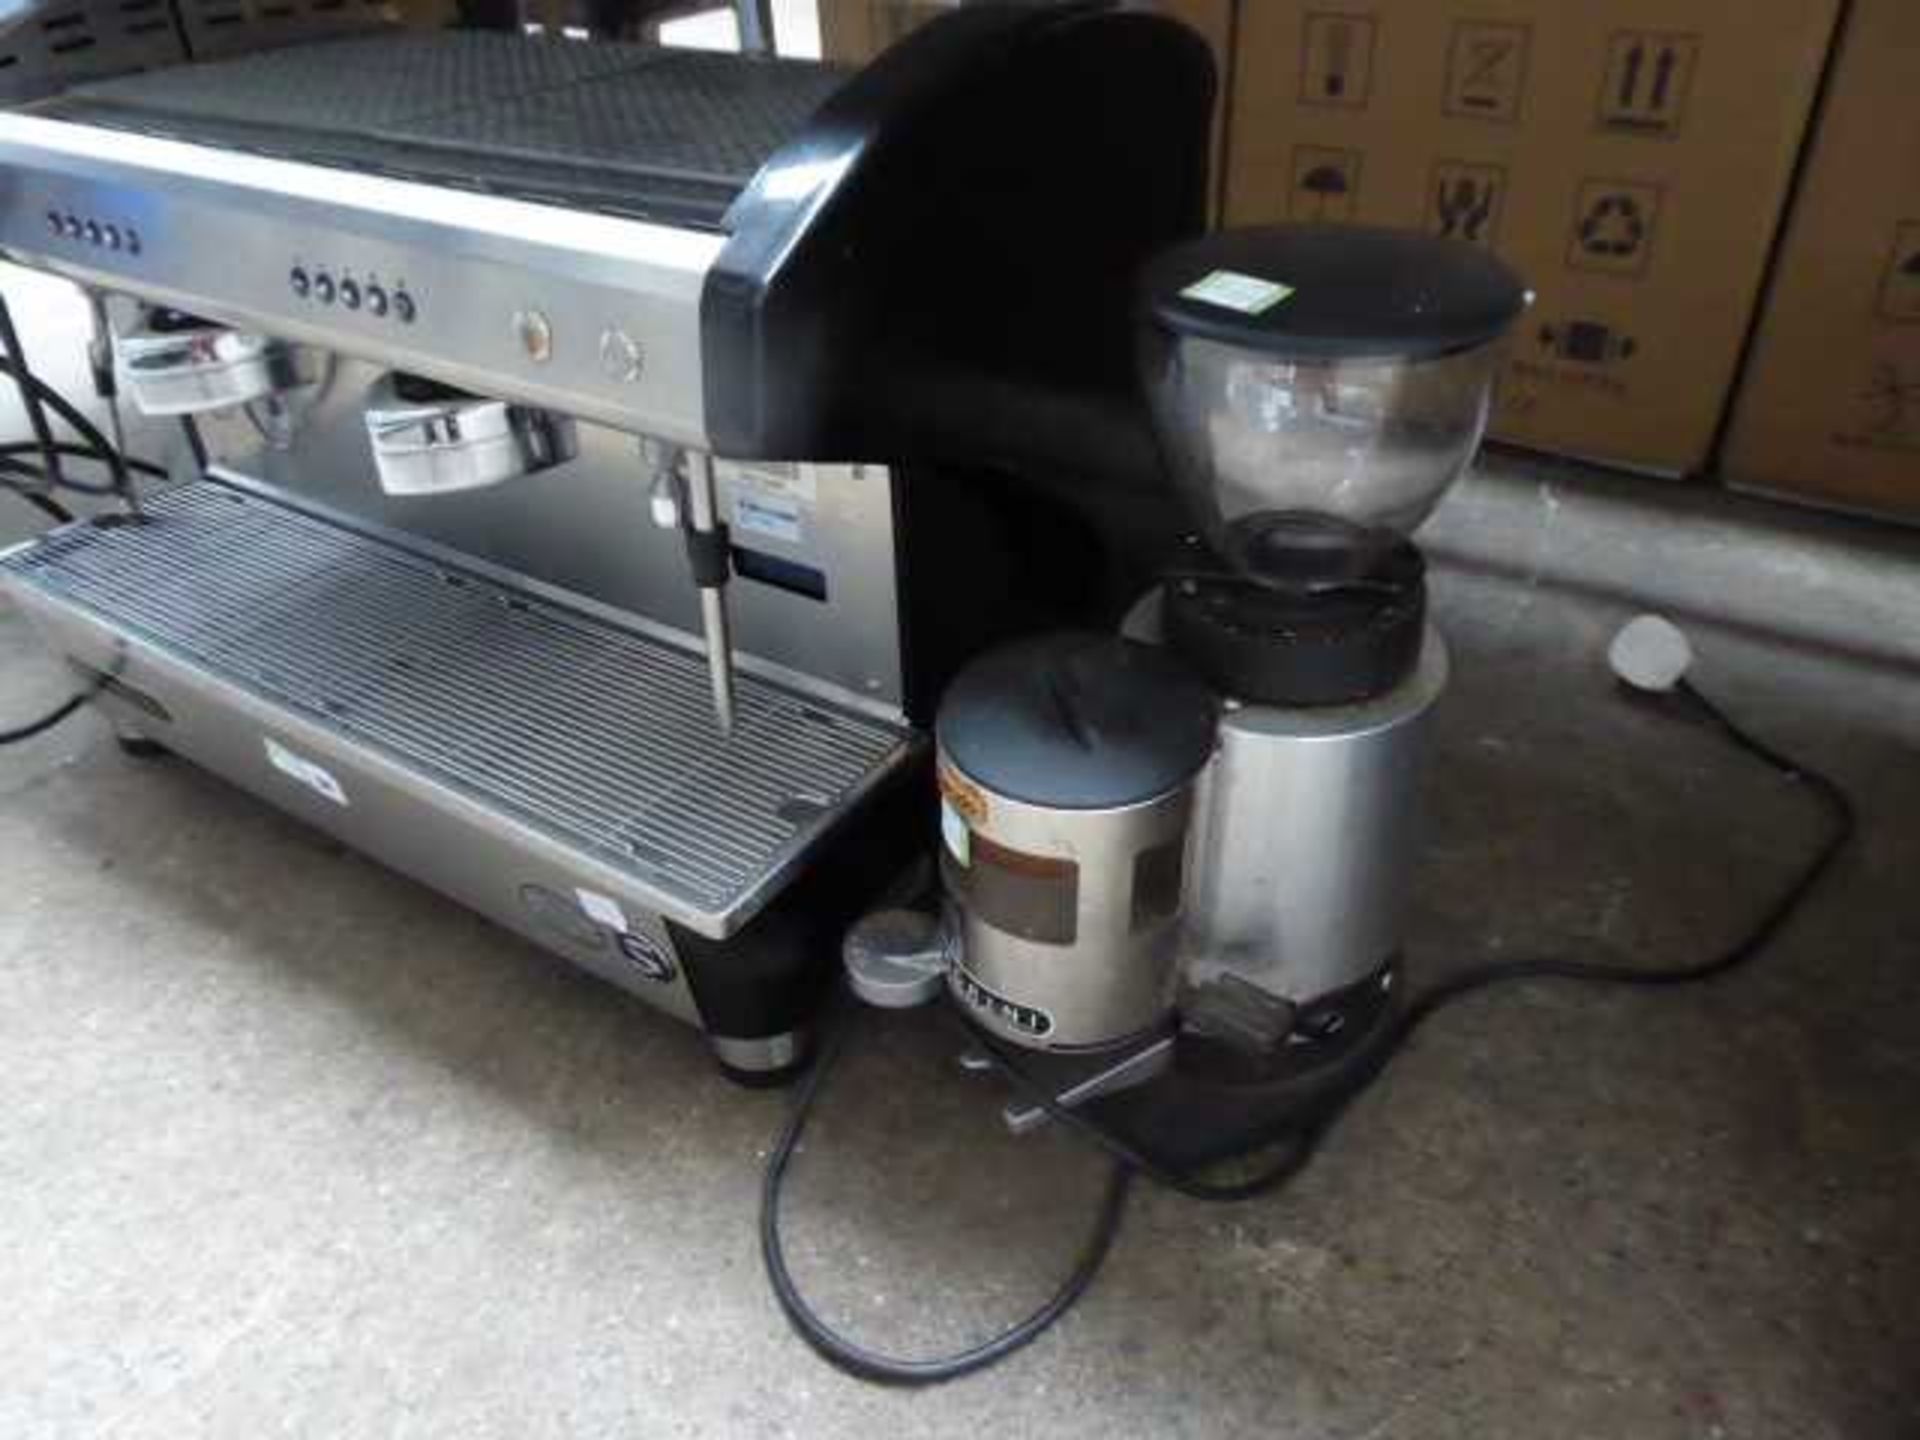 470 - (TN30) 70cm Magrini S series automatic 2 station coffee machine with 2 groupheads and a - Image 2 of 2